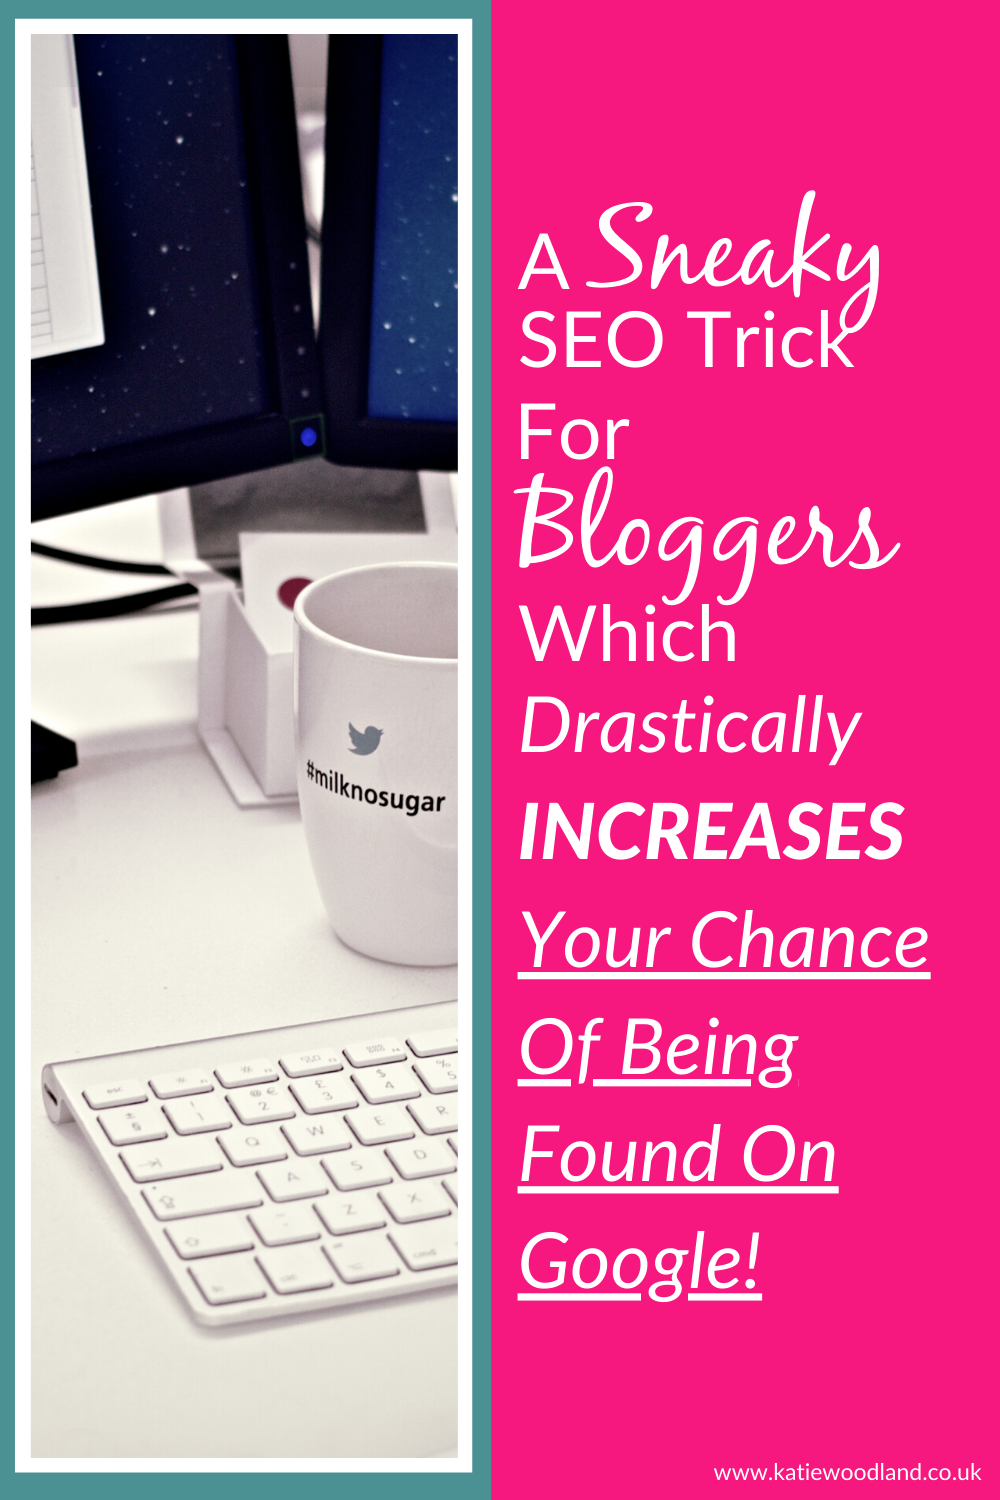 A Sneaky SEO Trick For Bloggers Which Drastically Increases Your Chance Of Being Found On Google